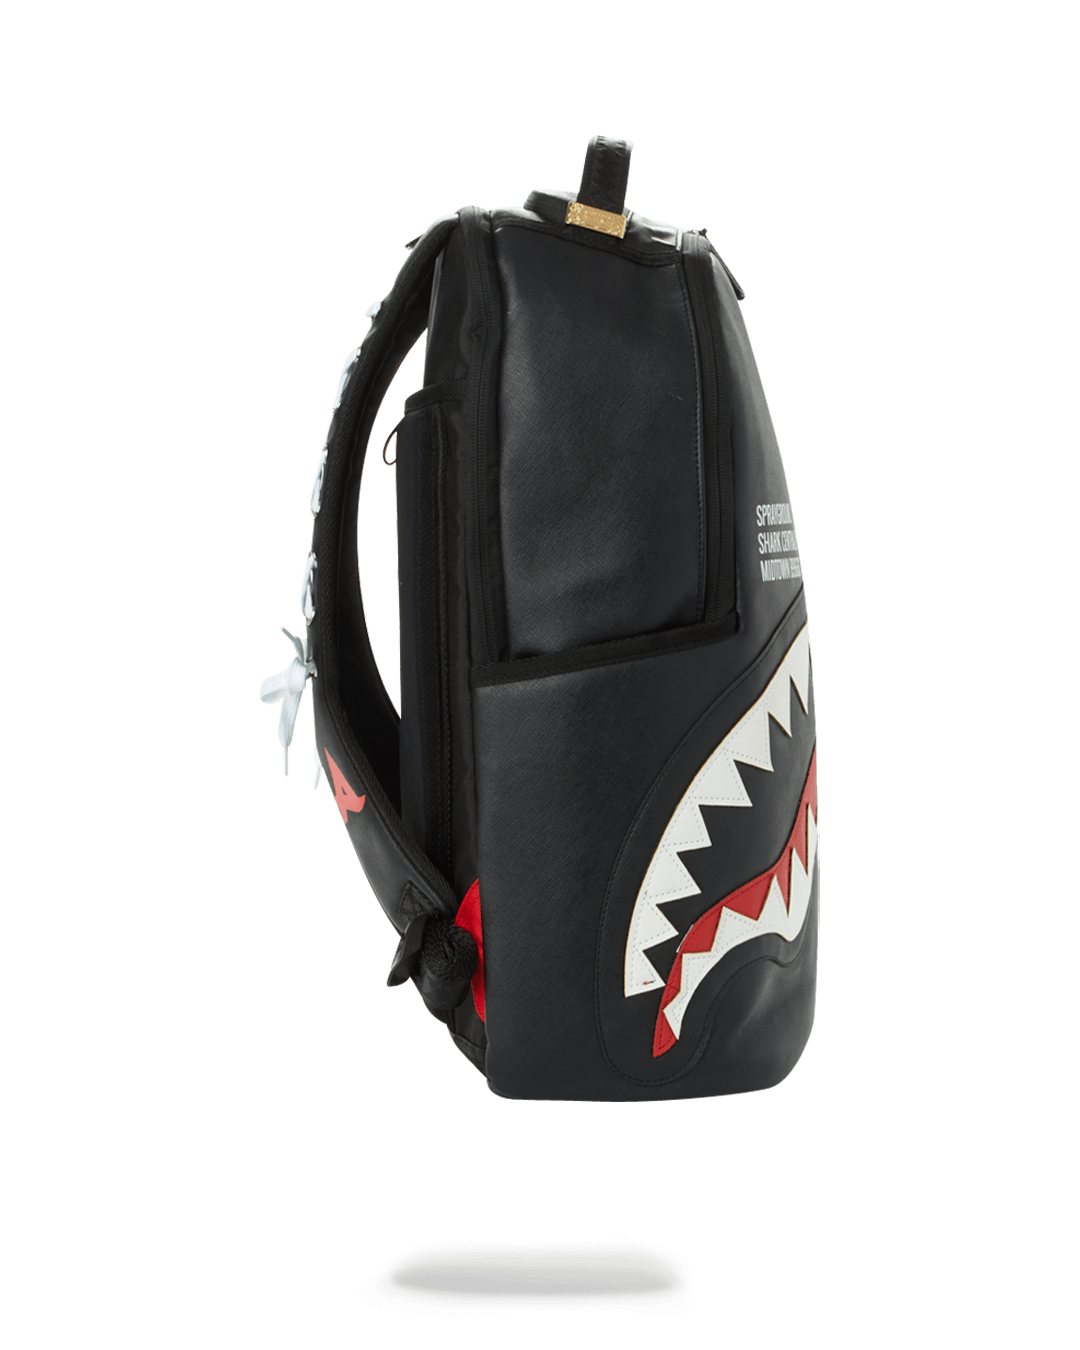 Discount | The Afrojack Shark Backpack Sprayground Sale sale & clearance | Shipping in 24h at ...